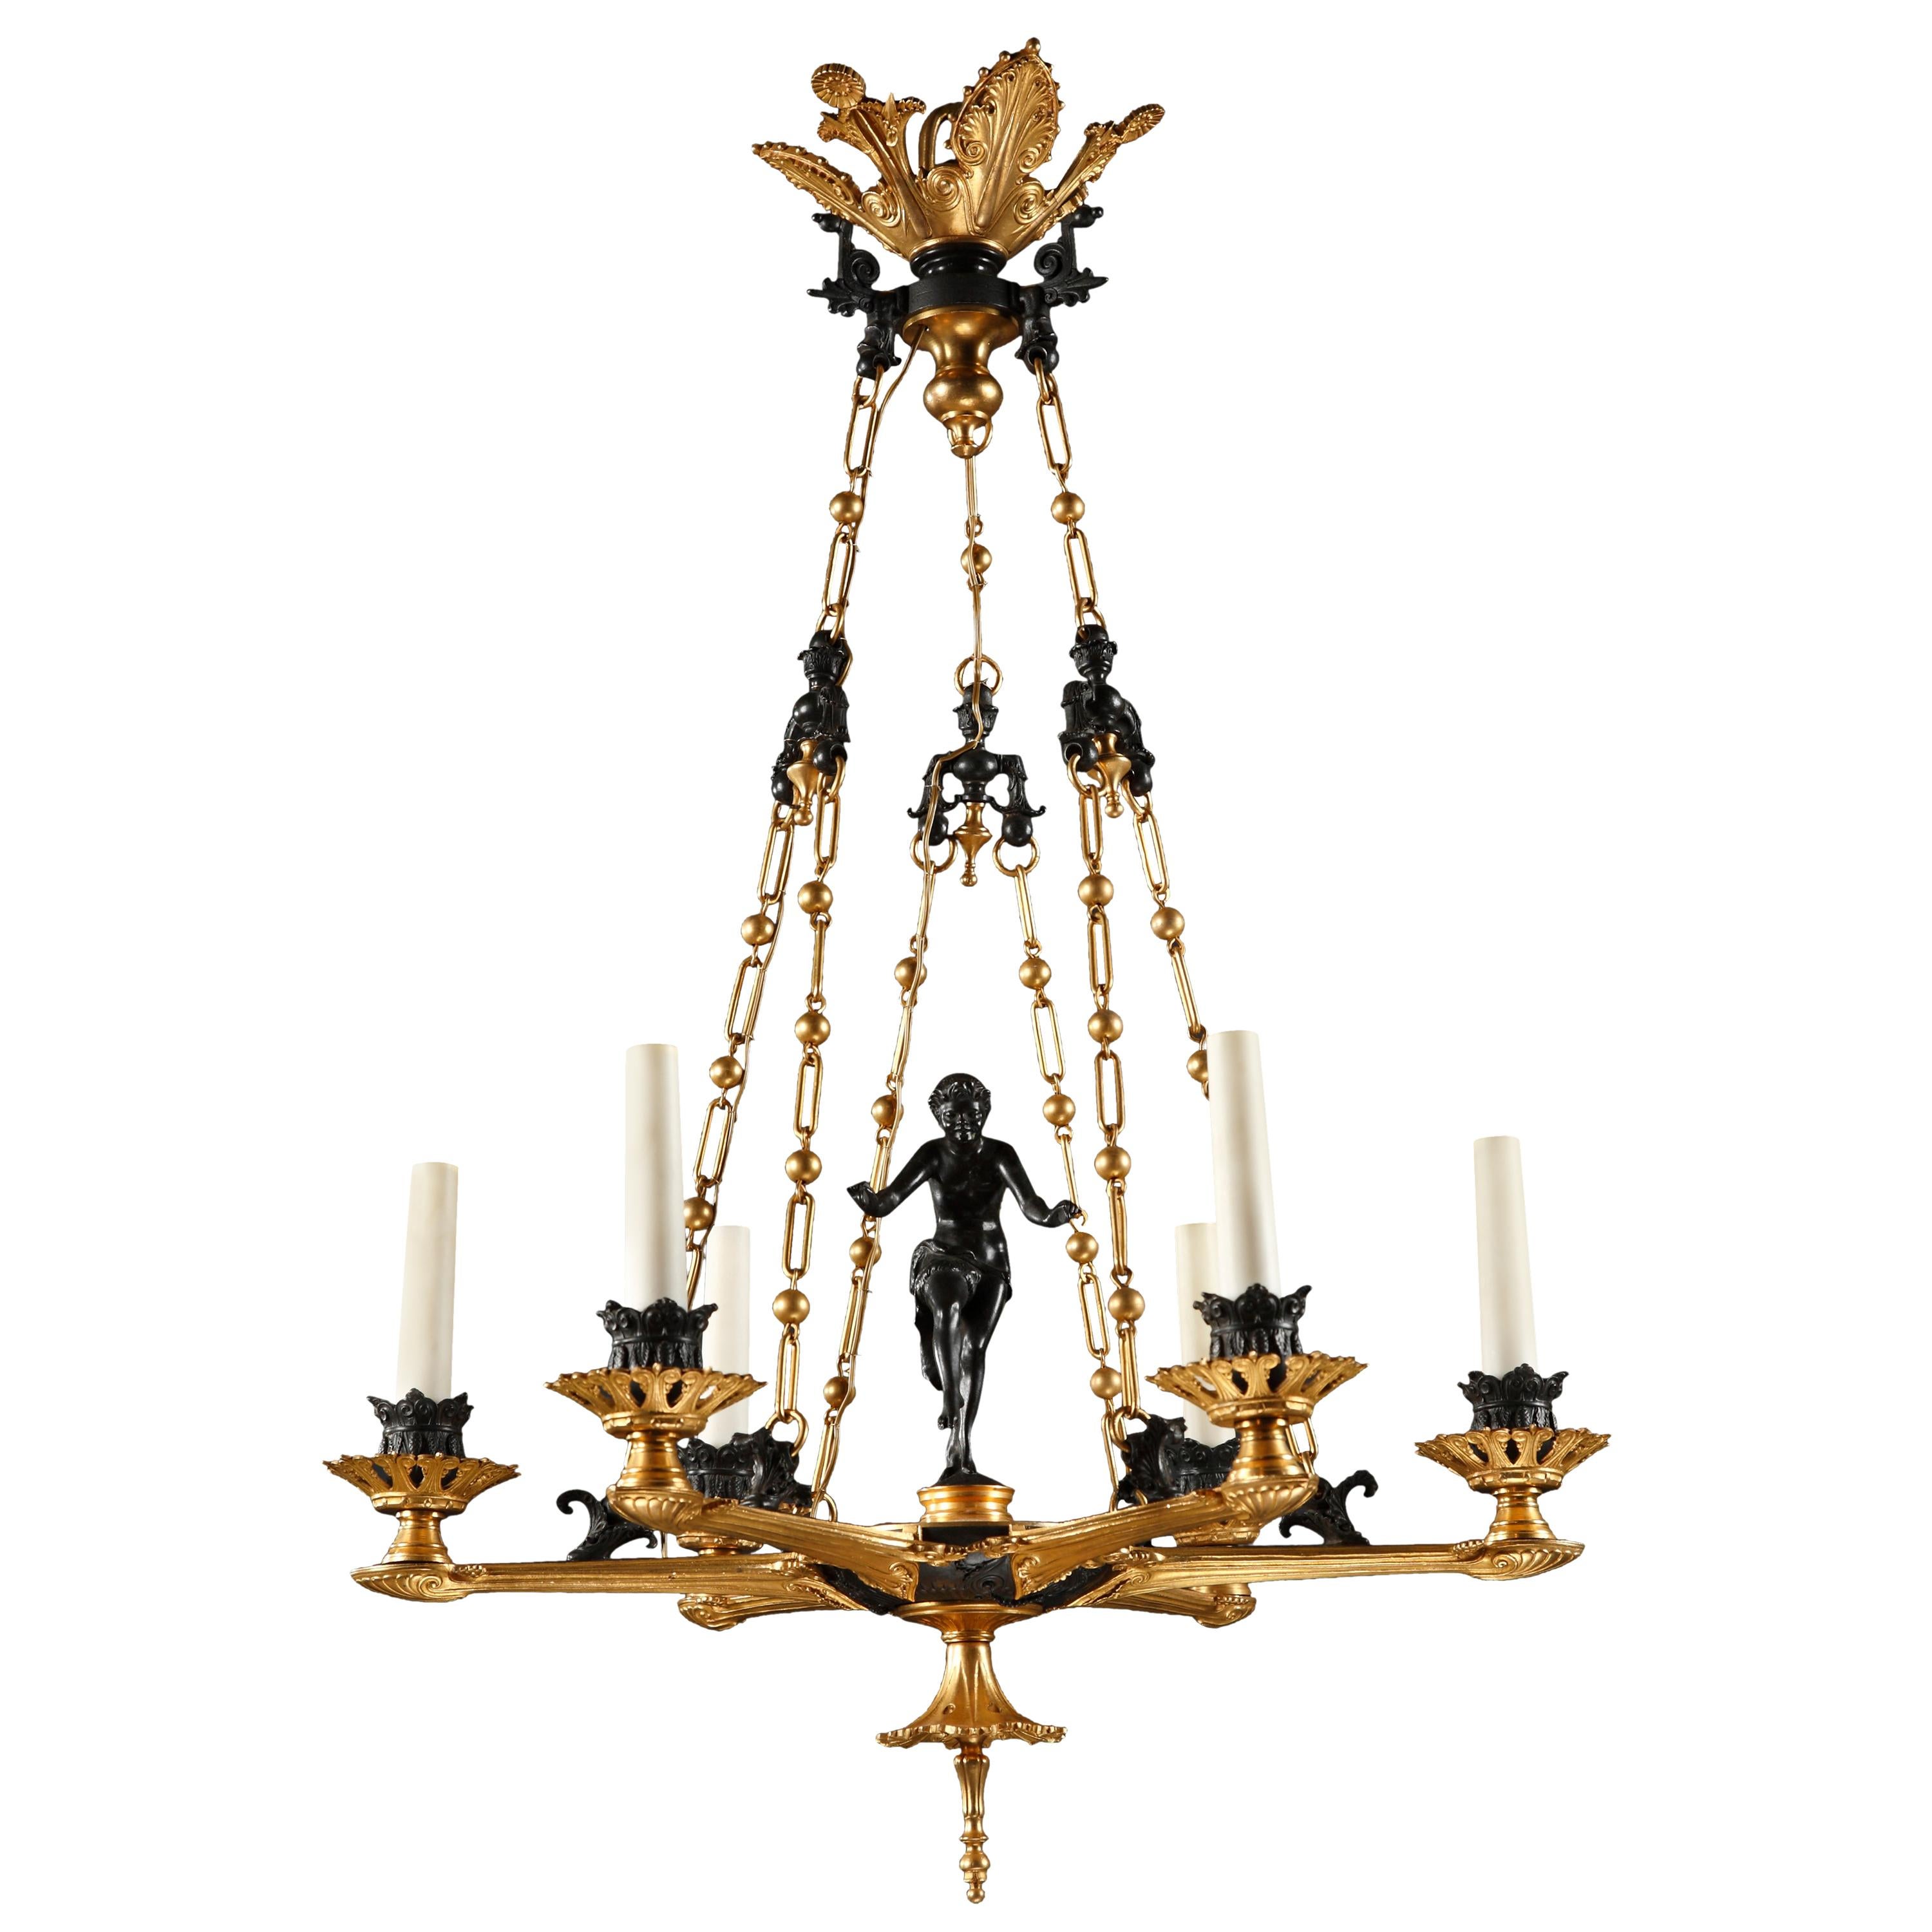 “Crotales Player” Chandelier Attributed to F. Barbedienne, France, Circa 1860